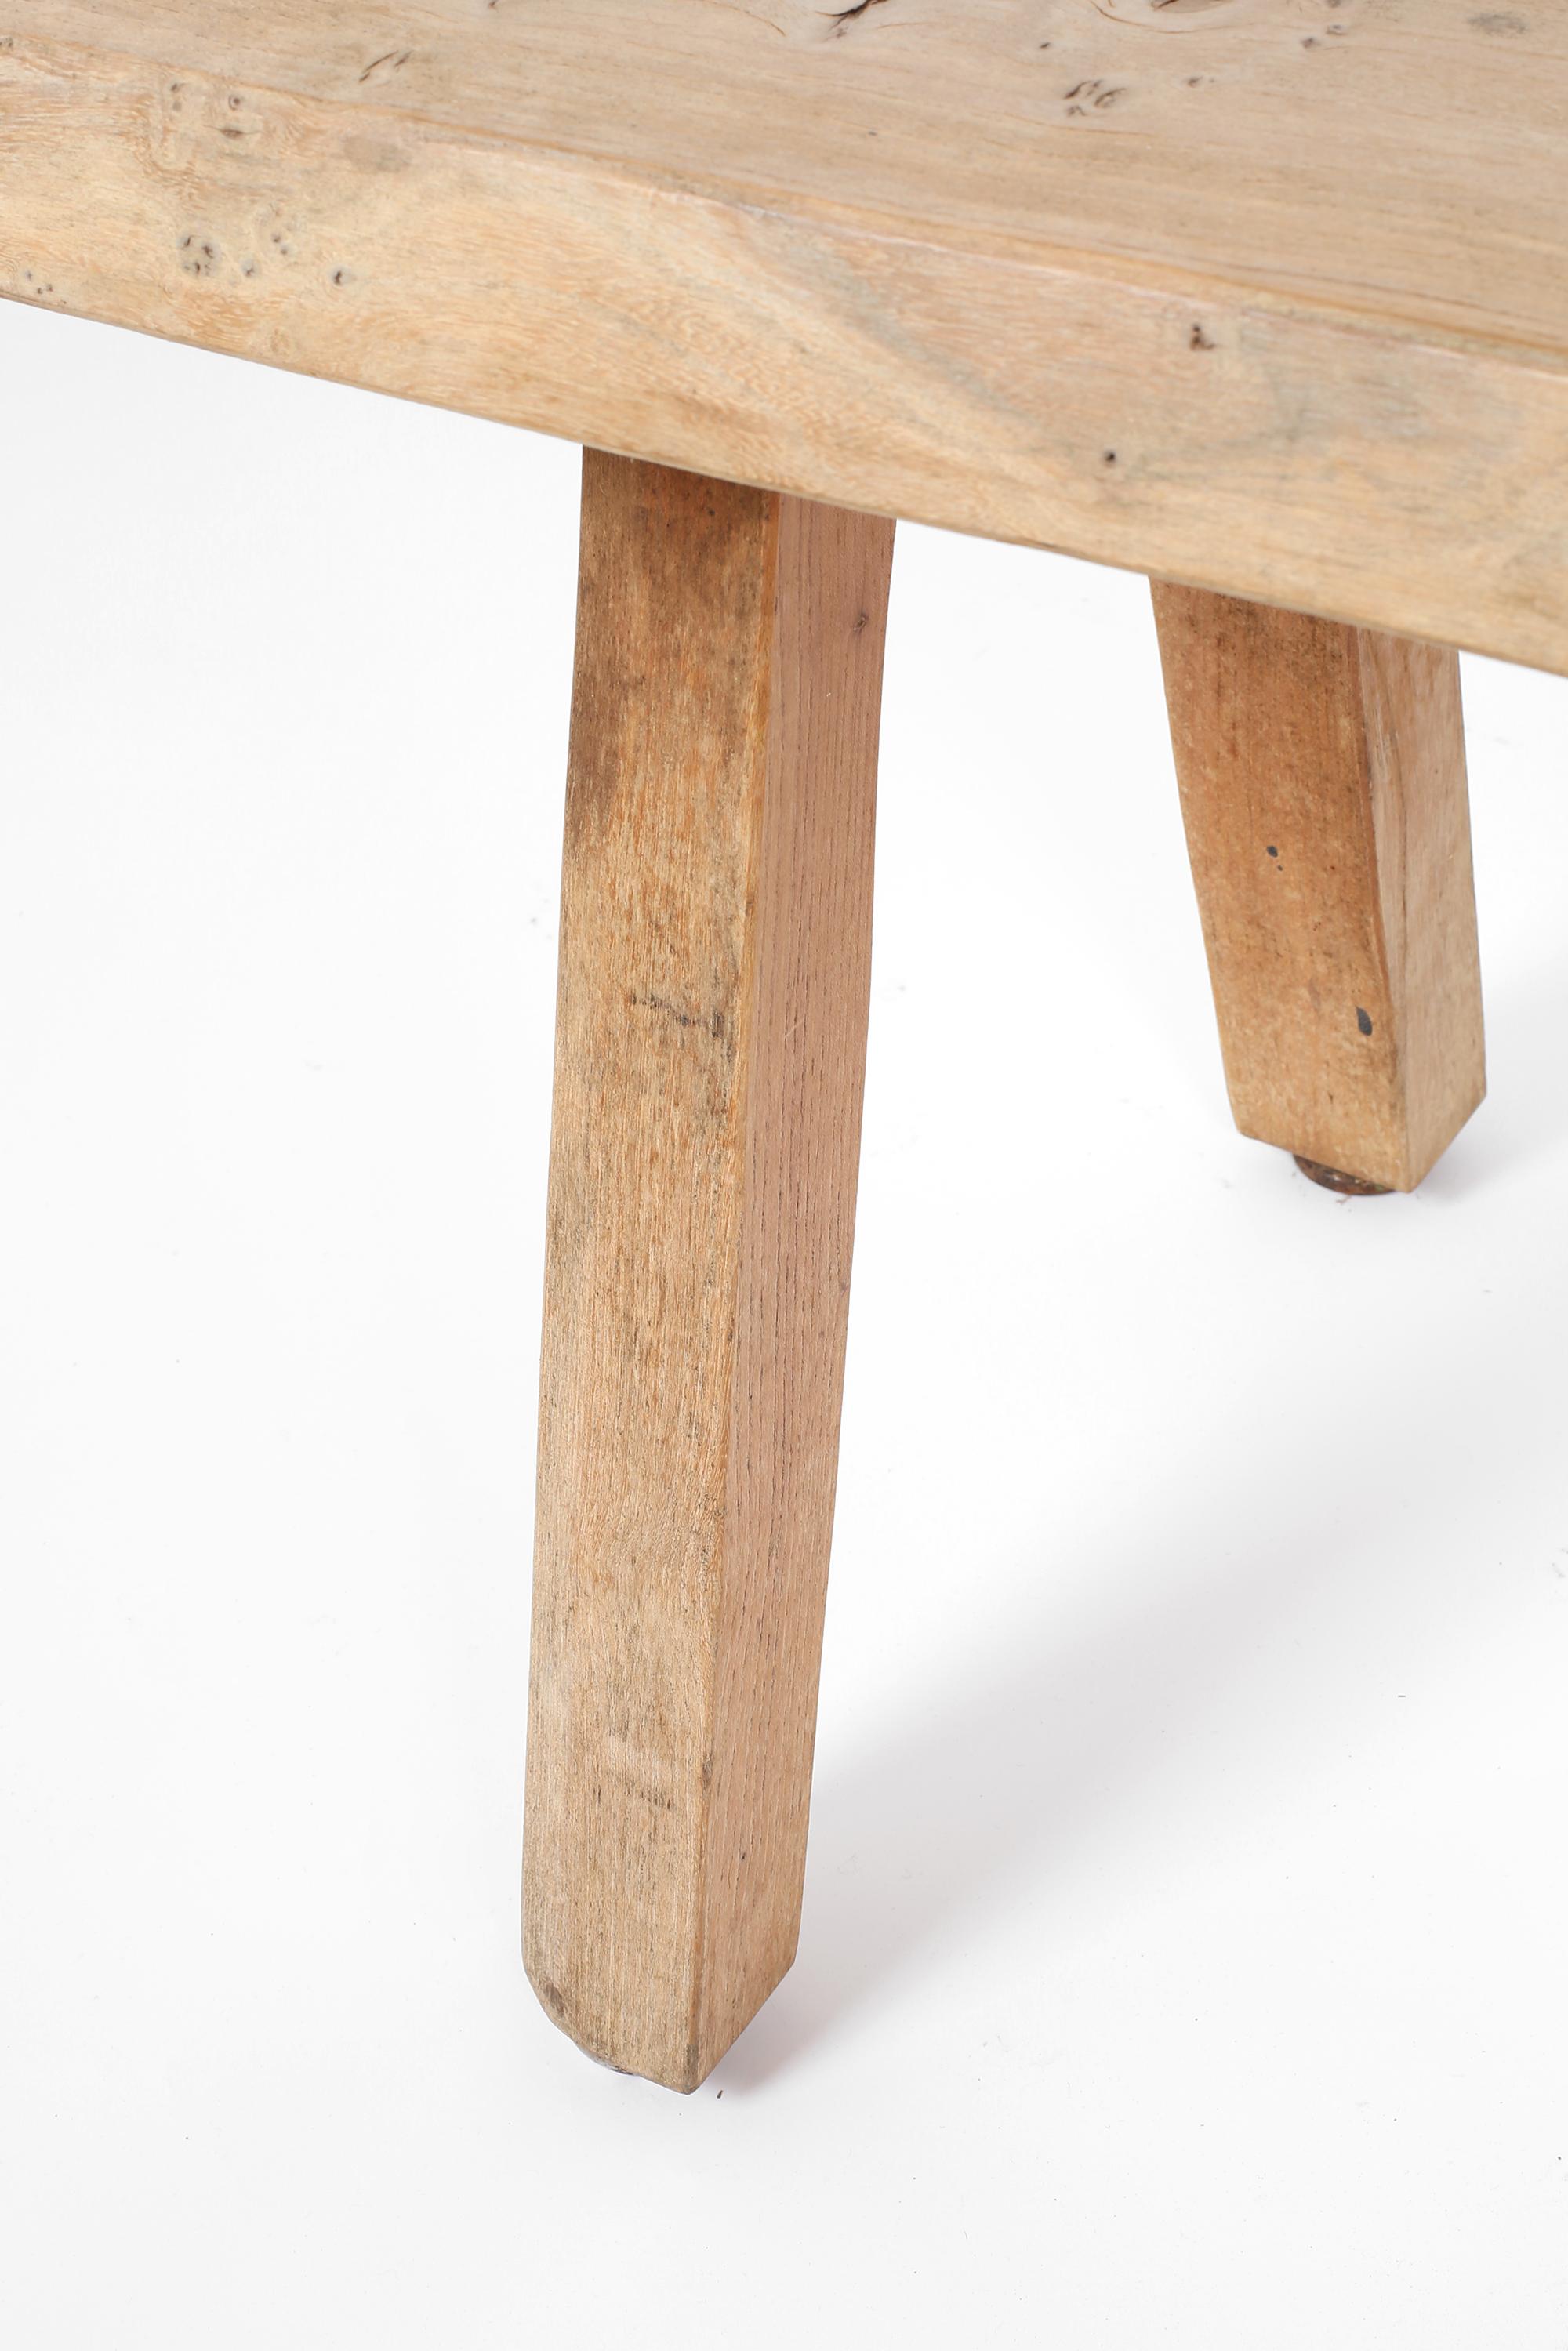 Solid Elm Bench Attributed to Olavi Hanninen, C. 1960s For Sale 2